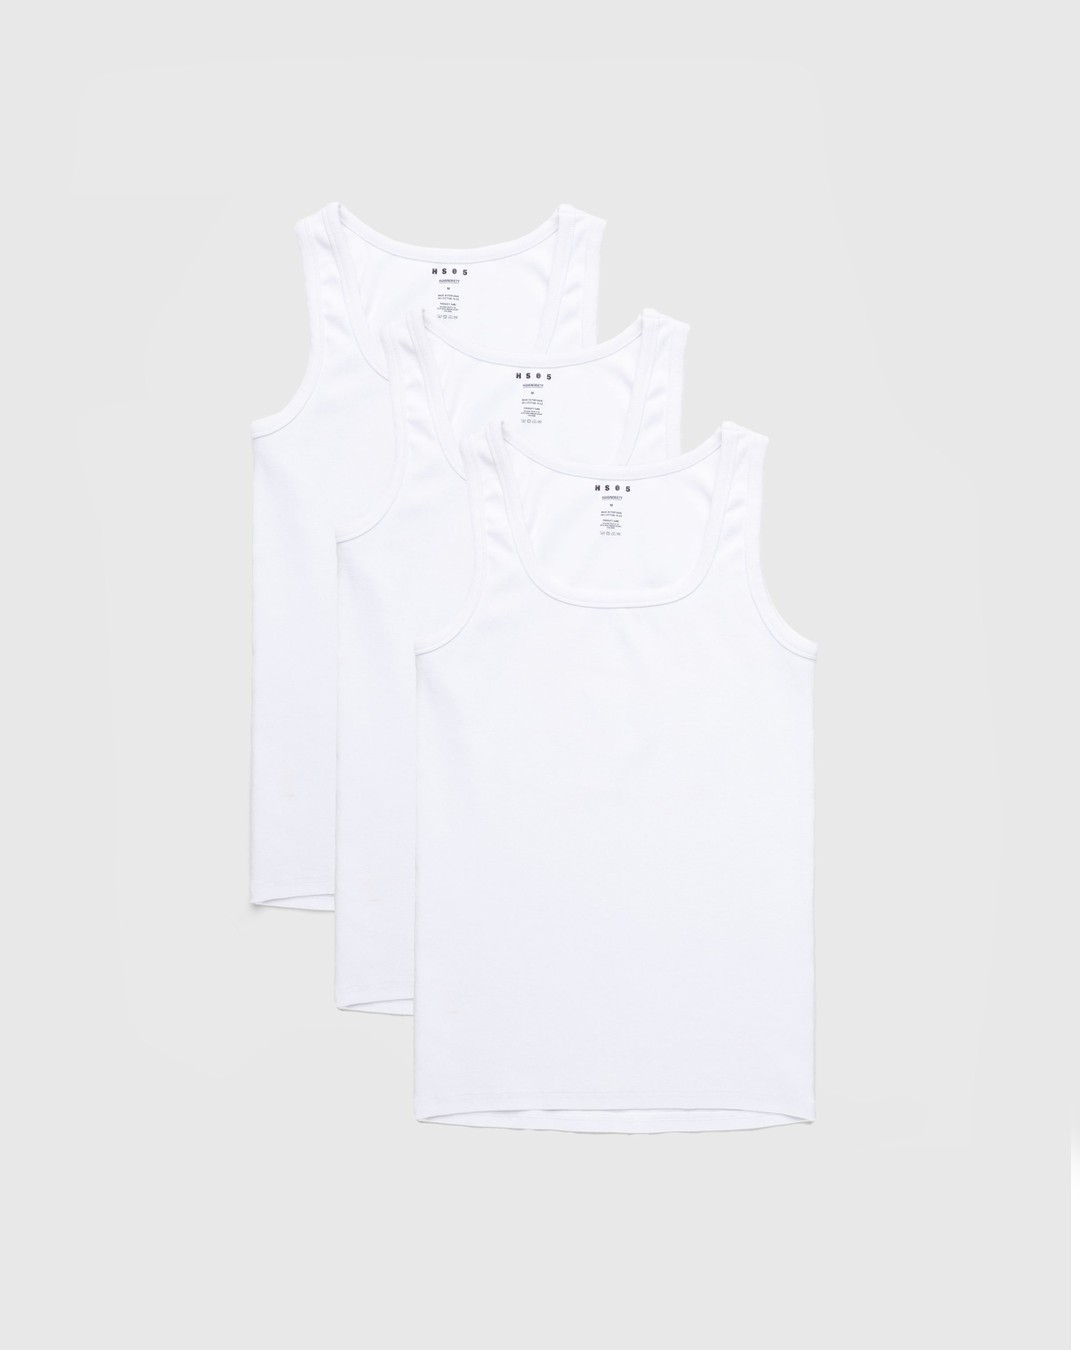 Highsnobiety HS05 – 3 Pack Heavyweight Tank Top White - Tops - White - Image 1